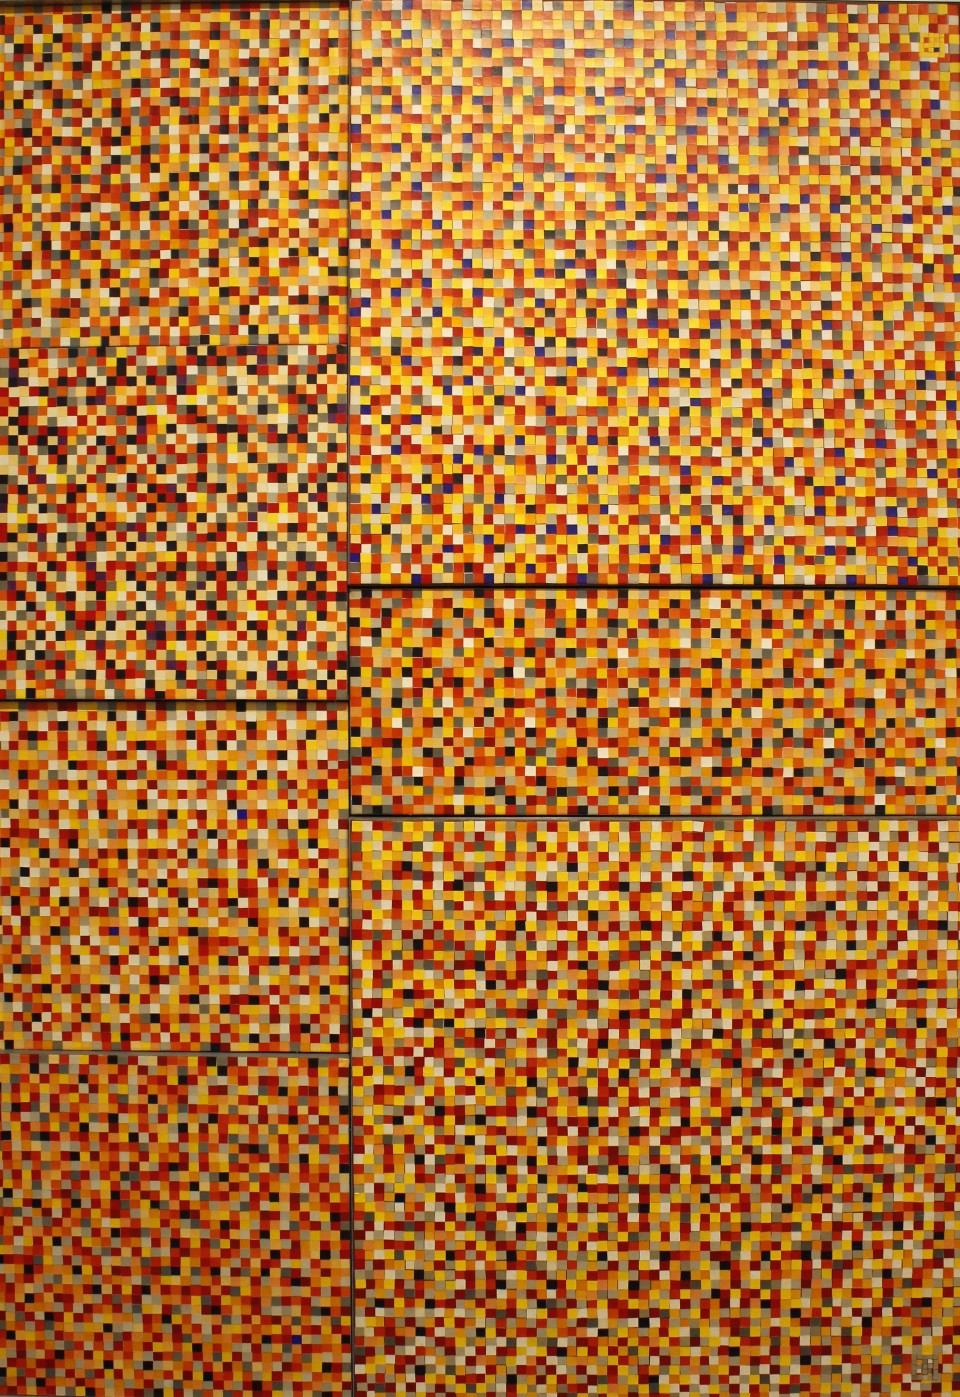 Solar Refraction,
1993,
acrylic on paper on canvases
72x48